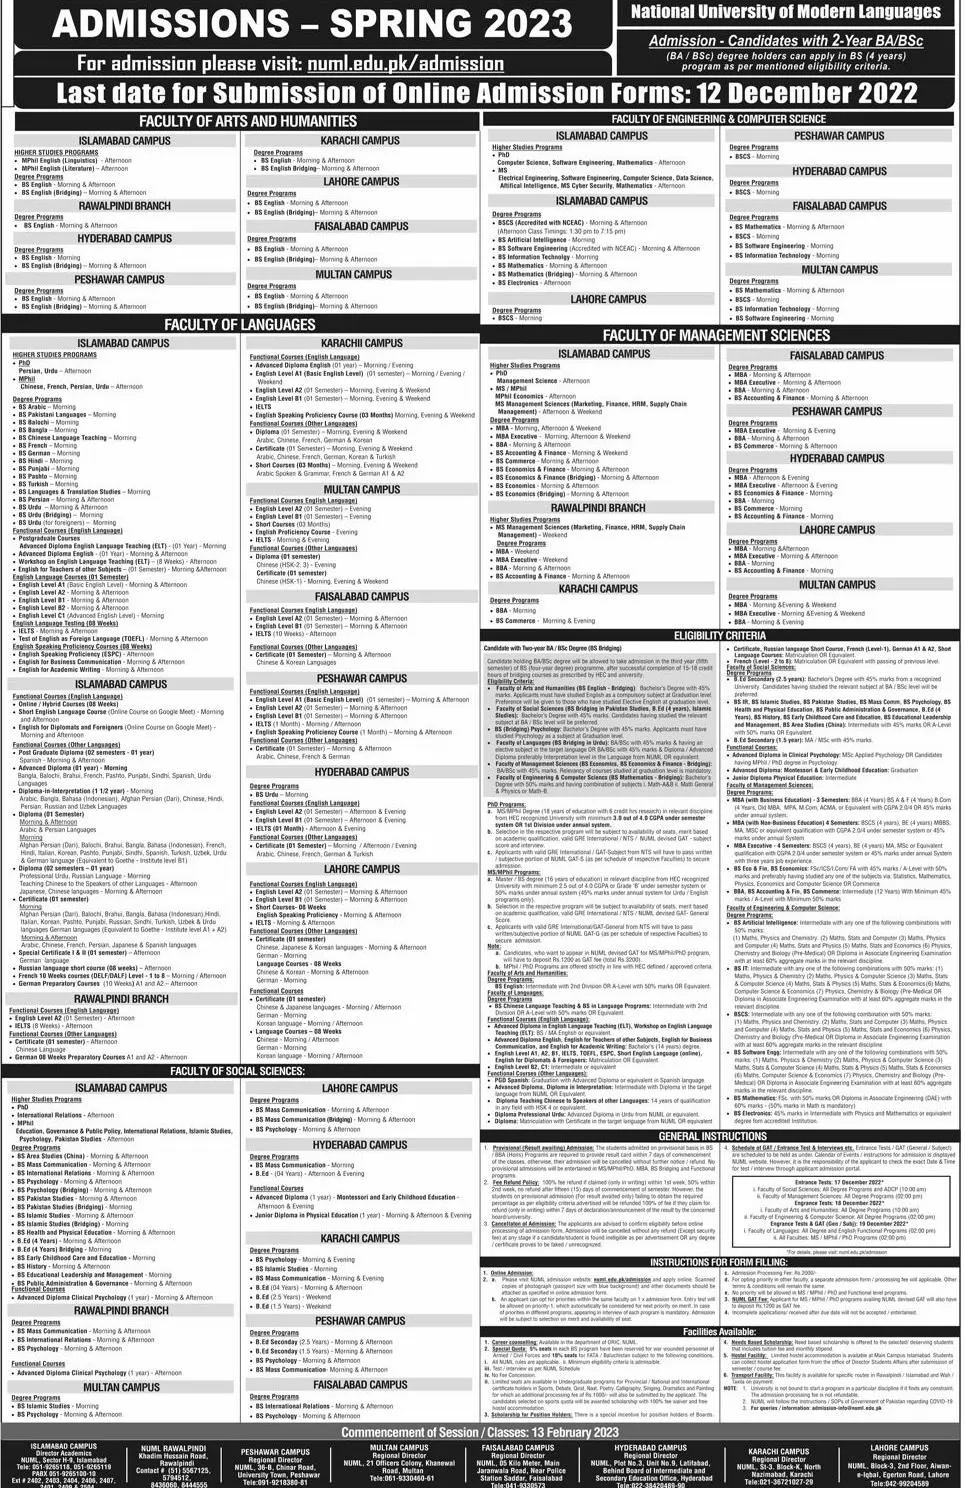 admission announcement of National University Of Modern Languages, Islamabad